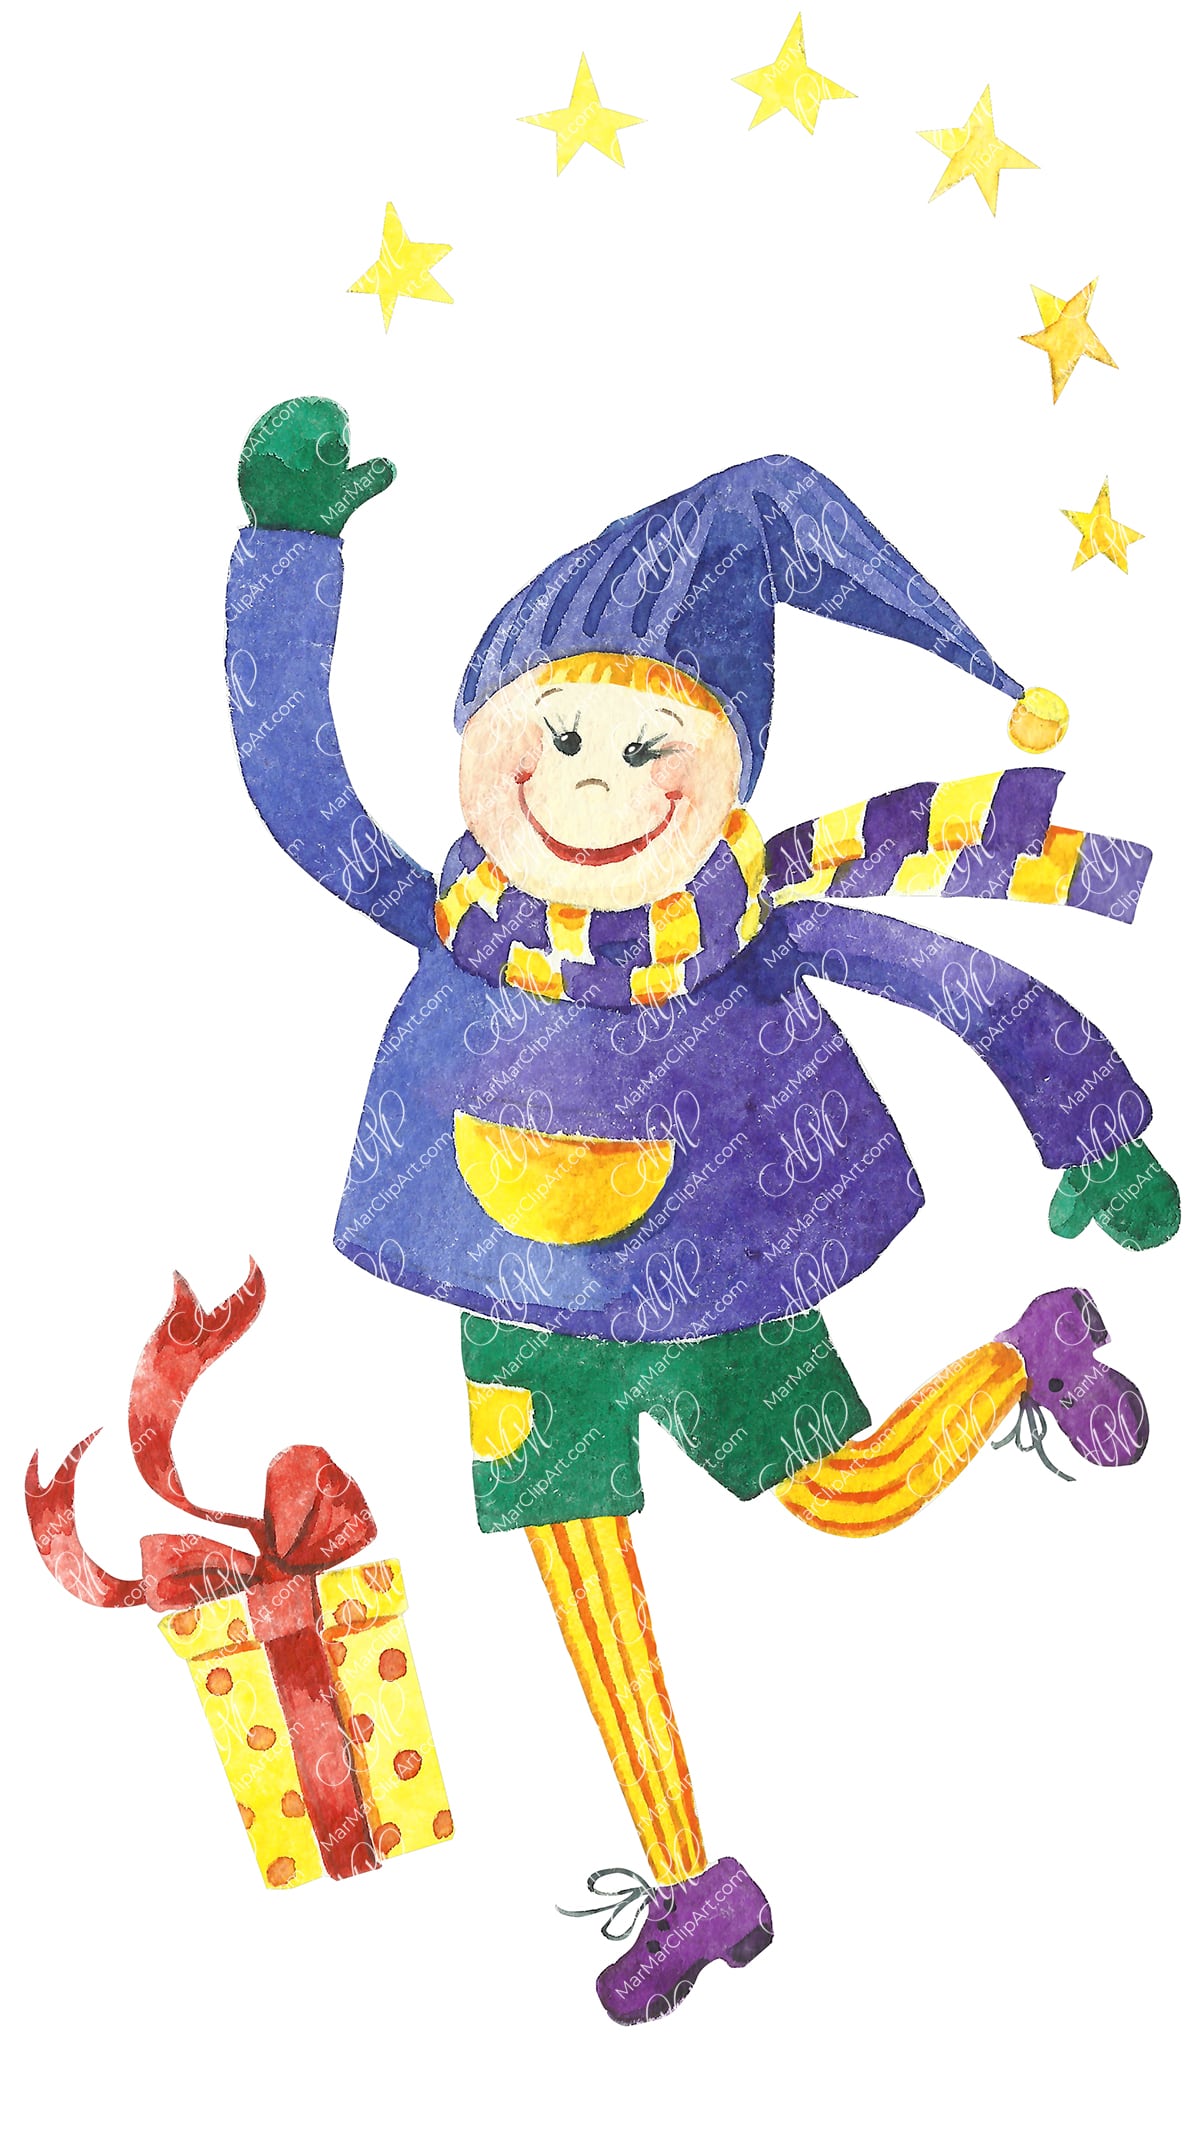 Funny boy. Watercolor hand made illustration, can be used for your cards, scrapbooking, invitations, for your design works